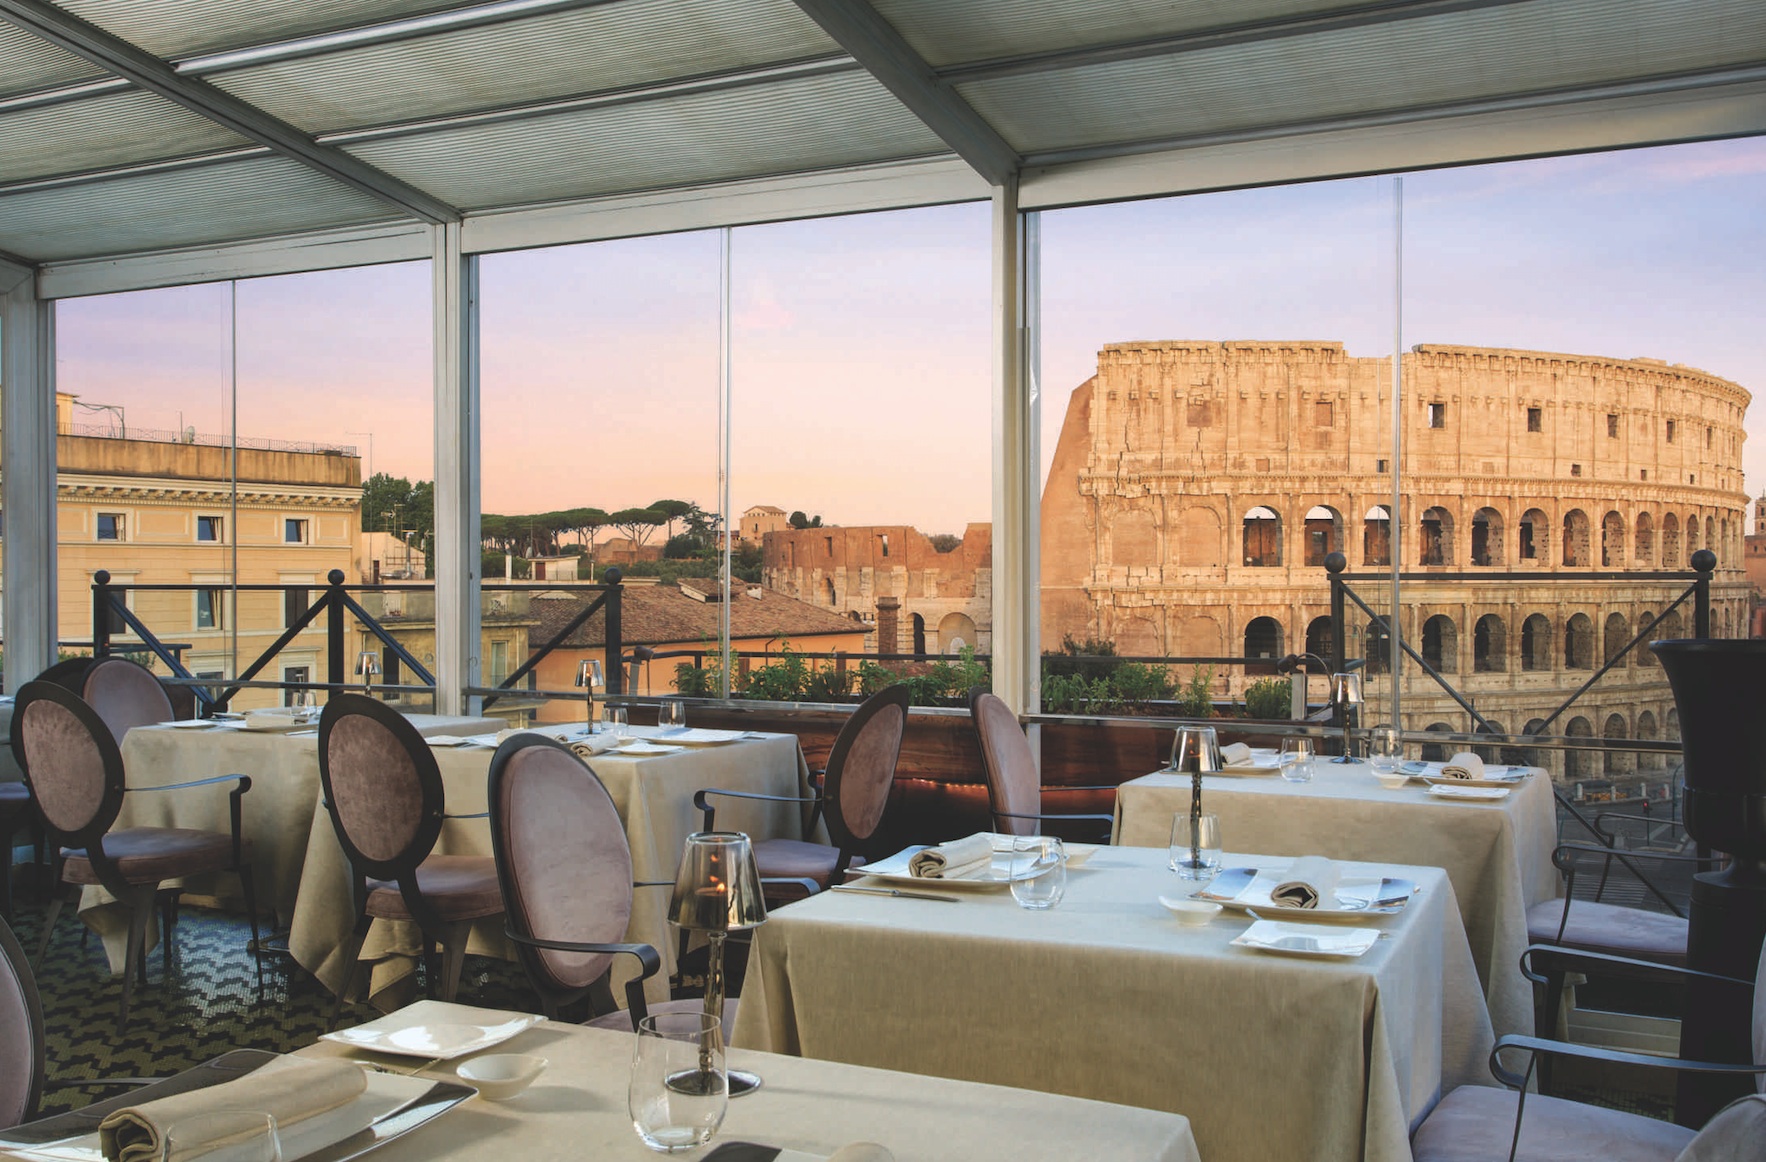 Eating Italy: 4 Michelin Star Restaurants to Try in Rome